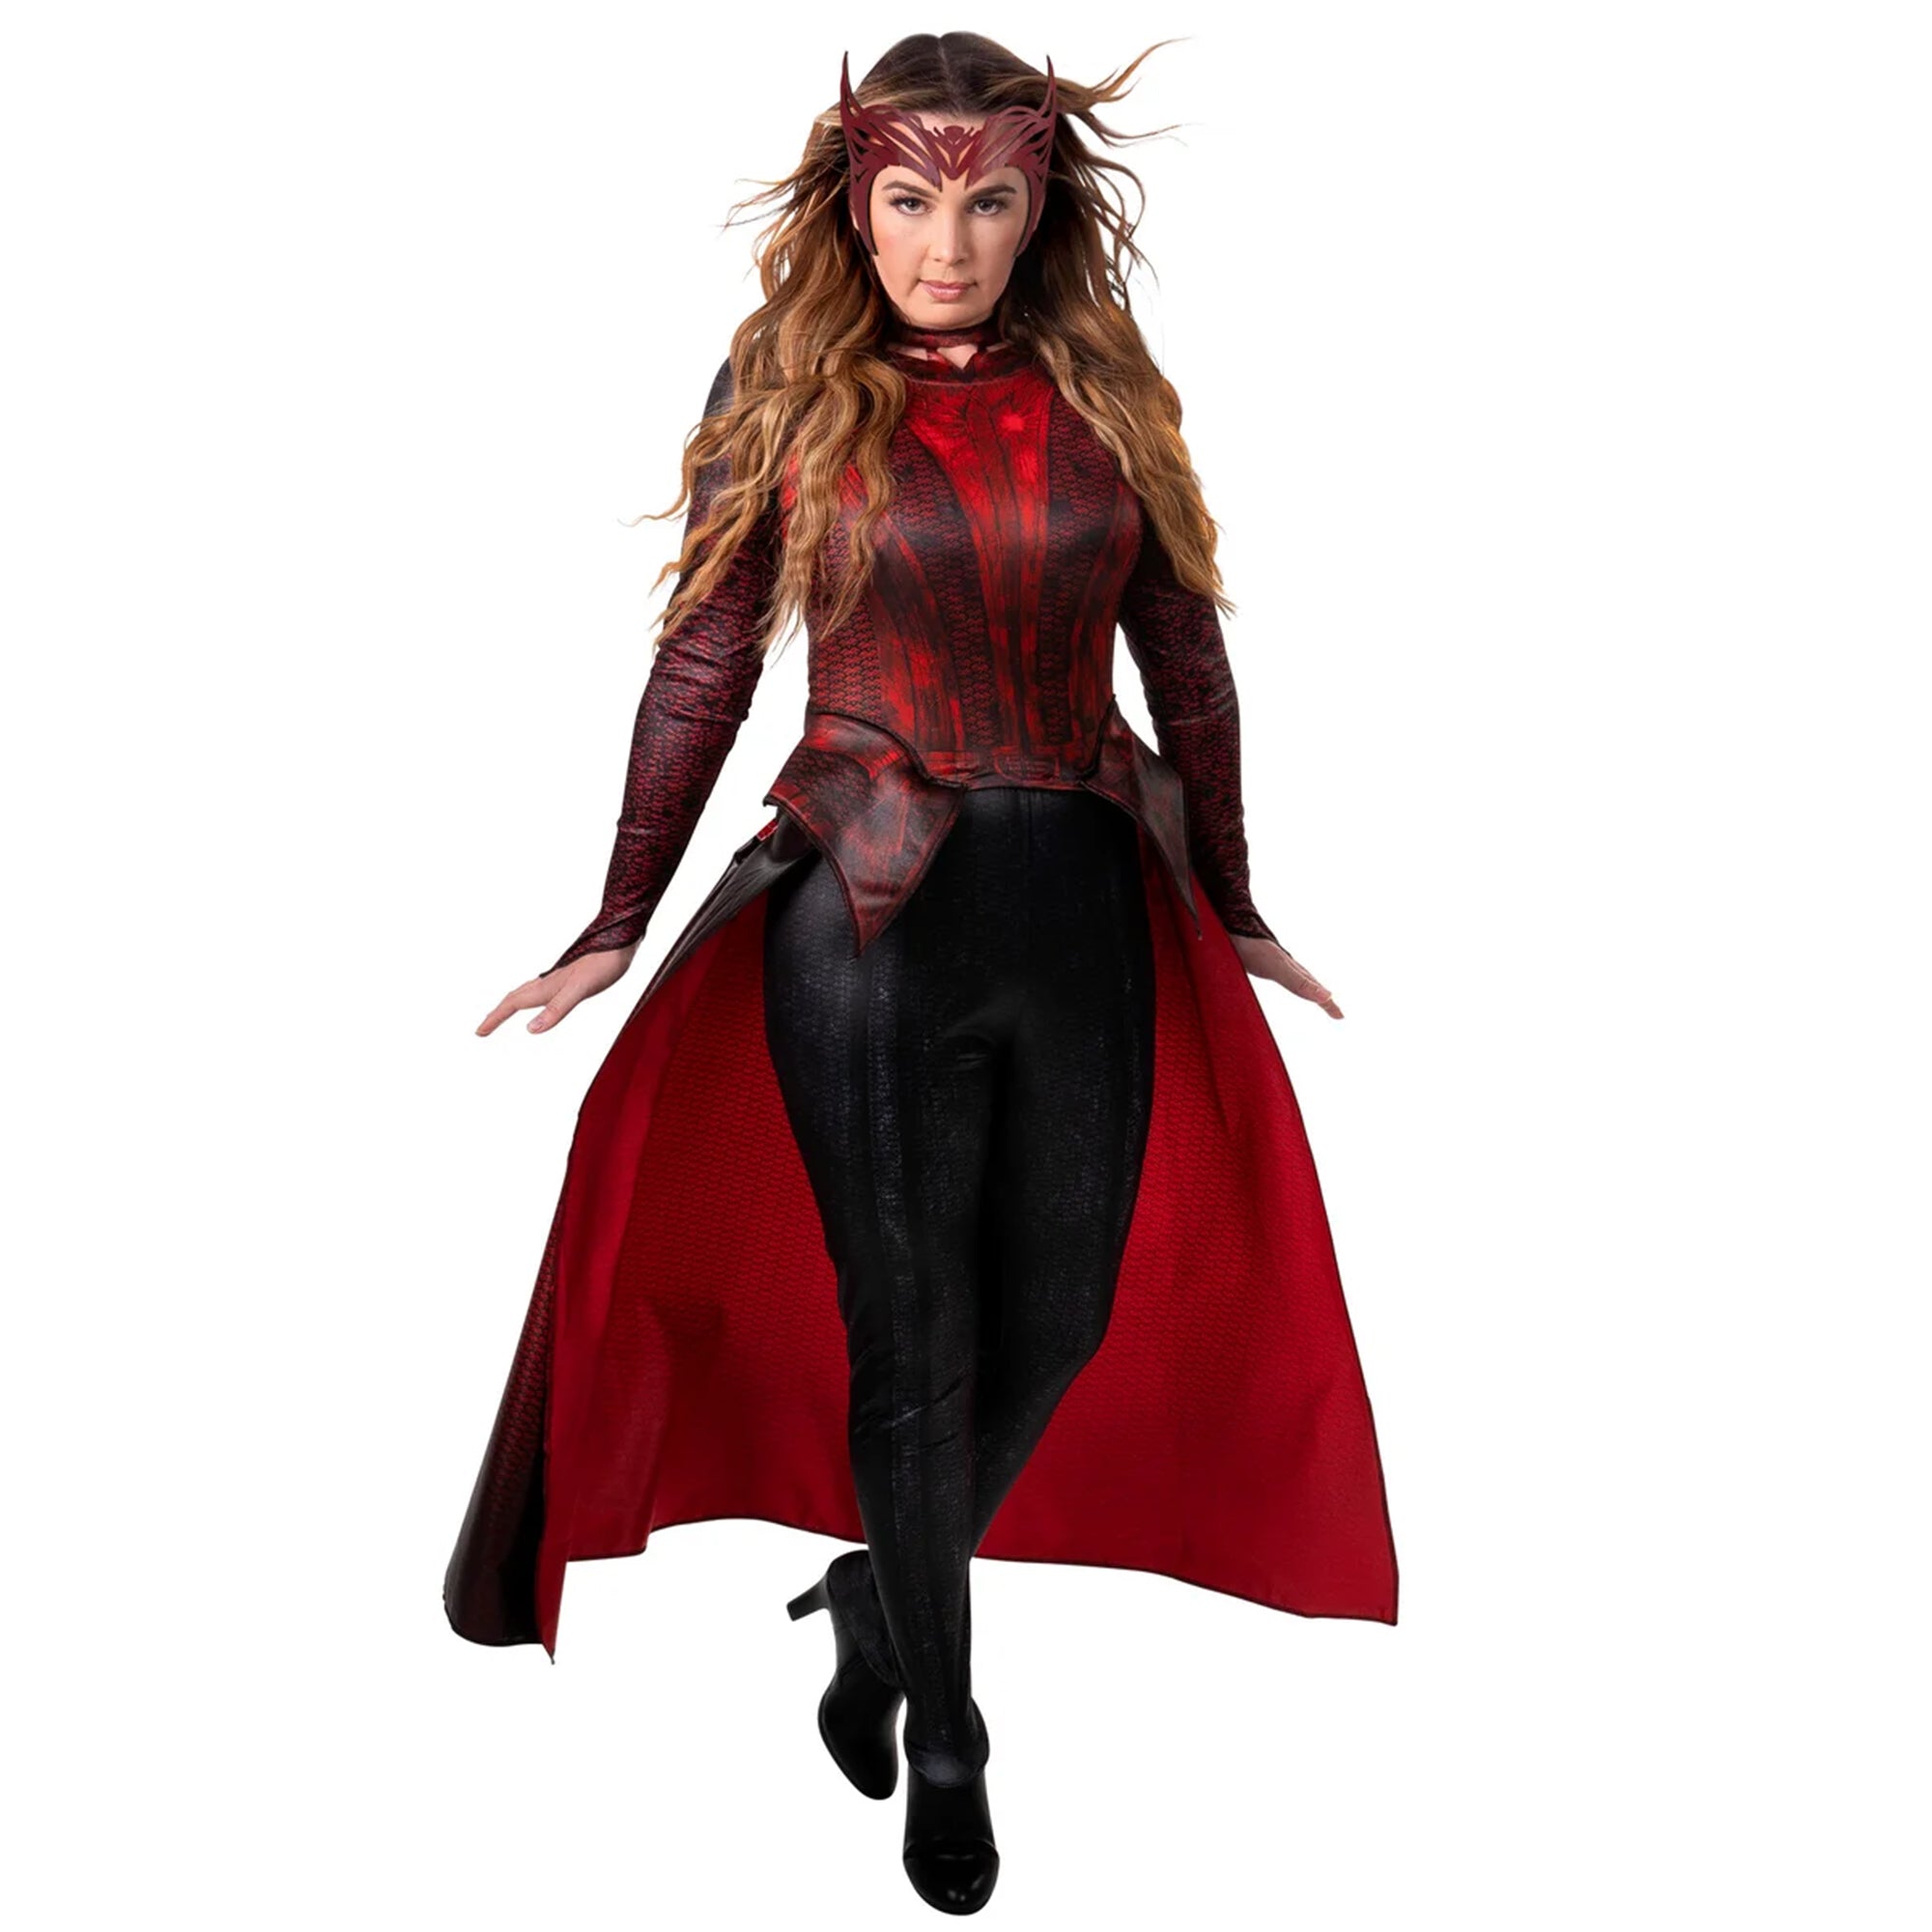 Marvel Dr. Strange Scarlet Witch Costume for Adults, Red and Black Bodice